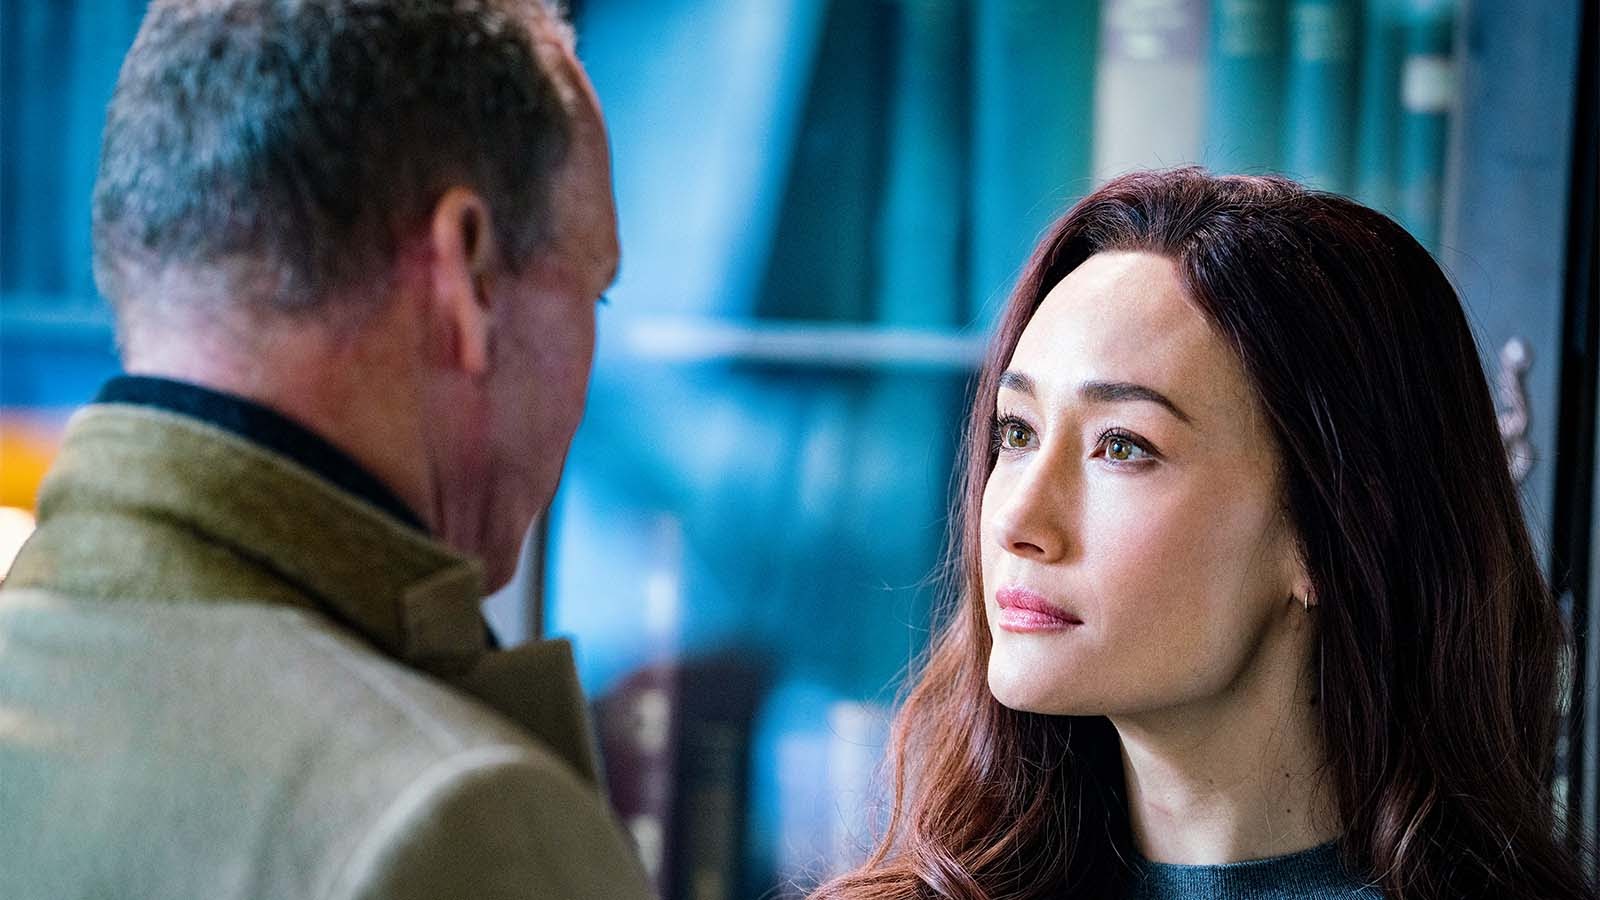 Rembrandt (Michael Keaton) and Anna (Maggie Q) develop a connection in The Protégé.